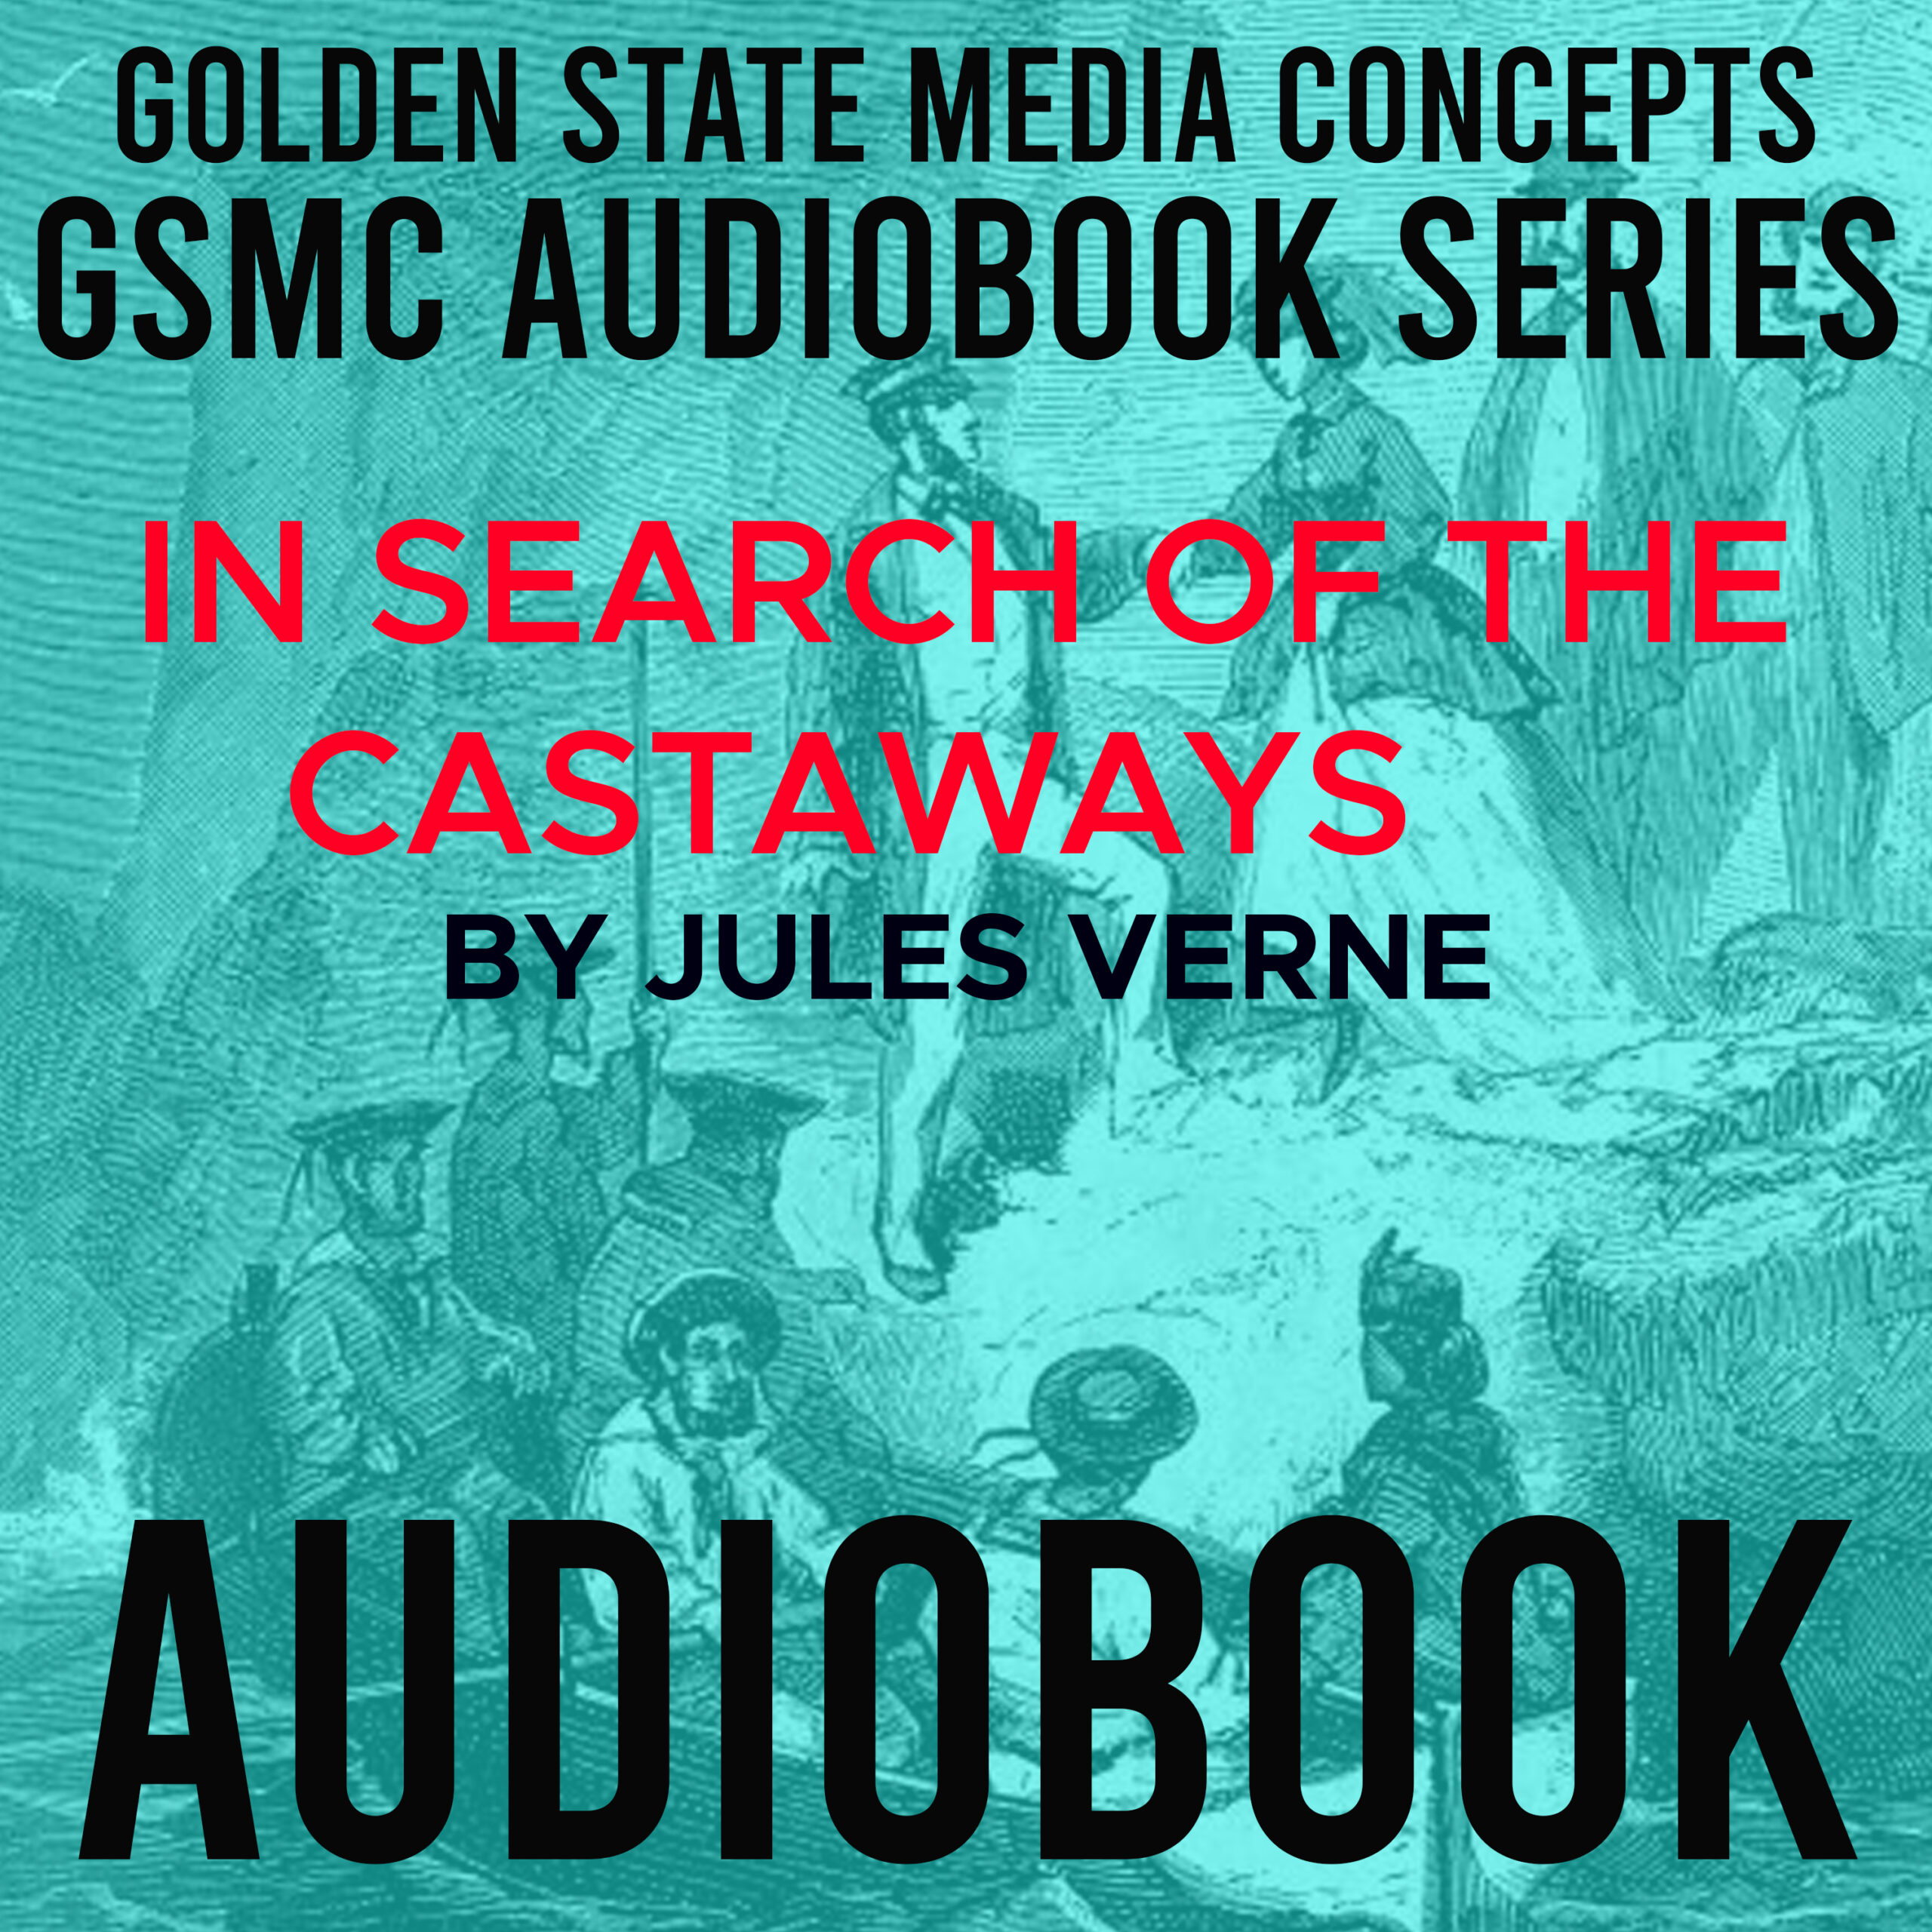 GSMC Audiobook Series: In Search of the Castaways